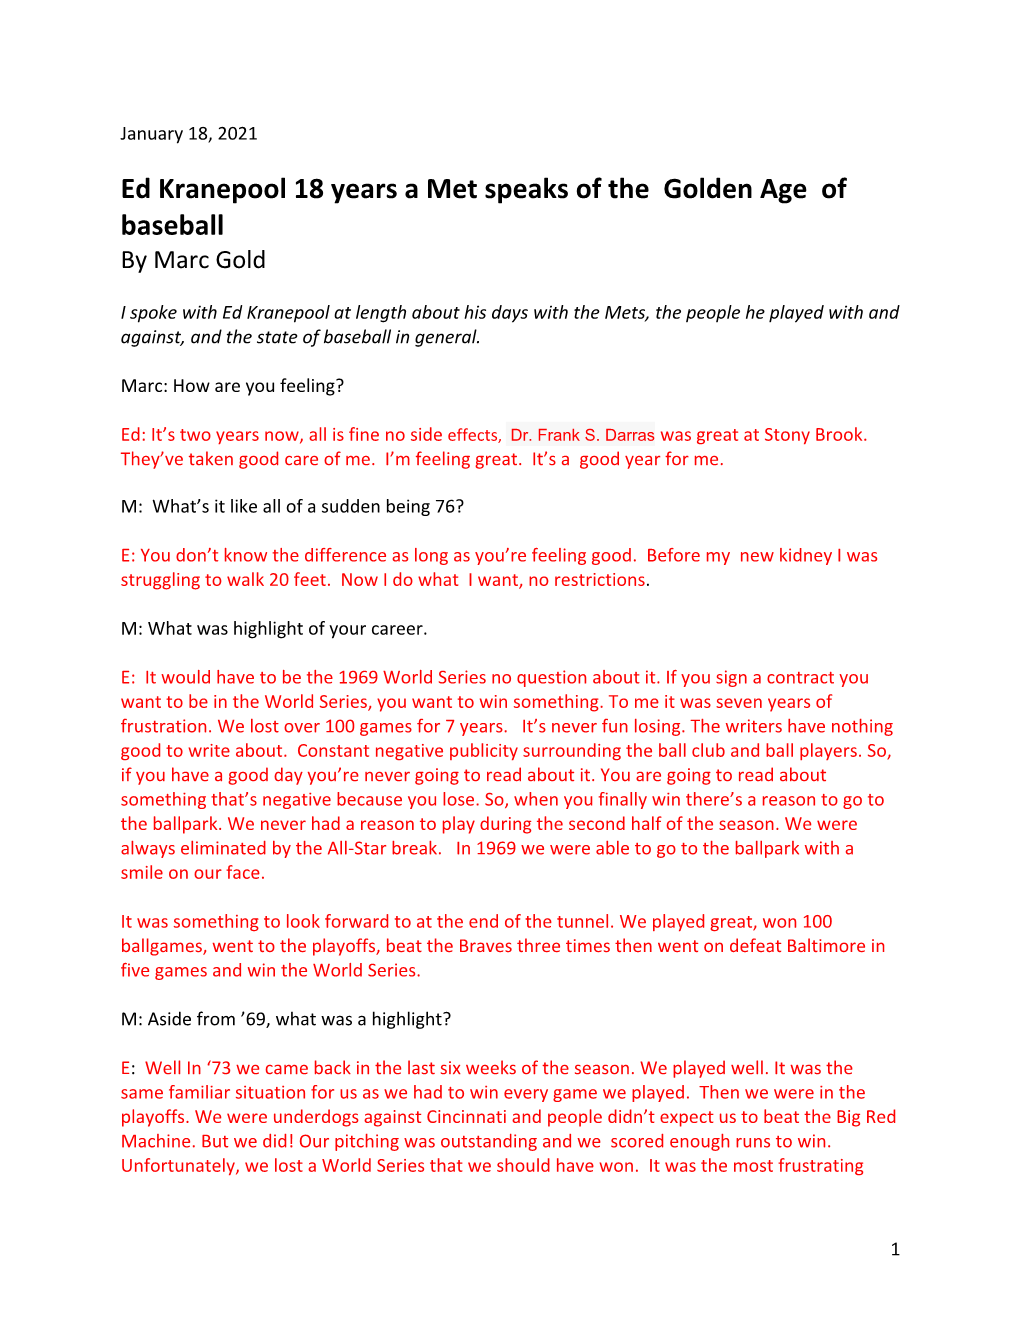 Ed Kranepool 18 Years a Met Speaks of the Golden Age of Baseball by Marc Gold